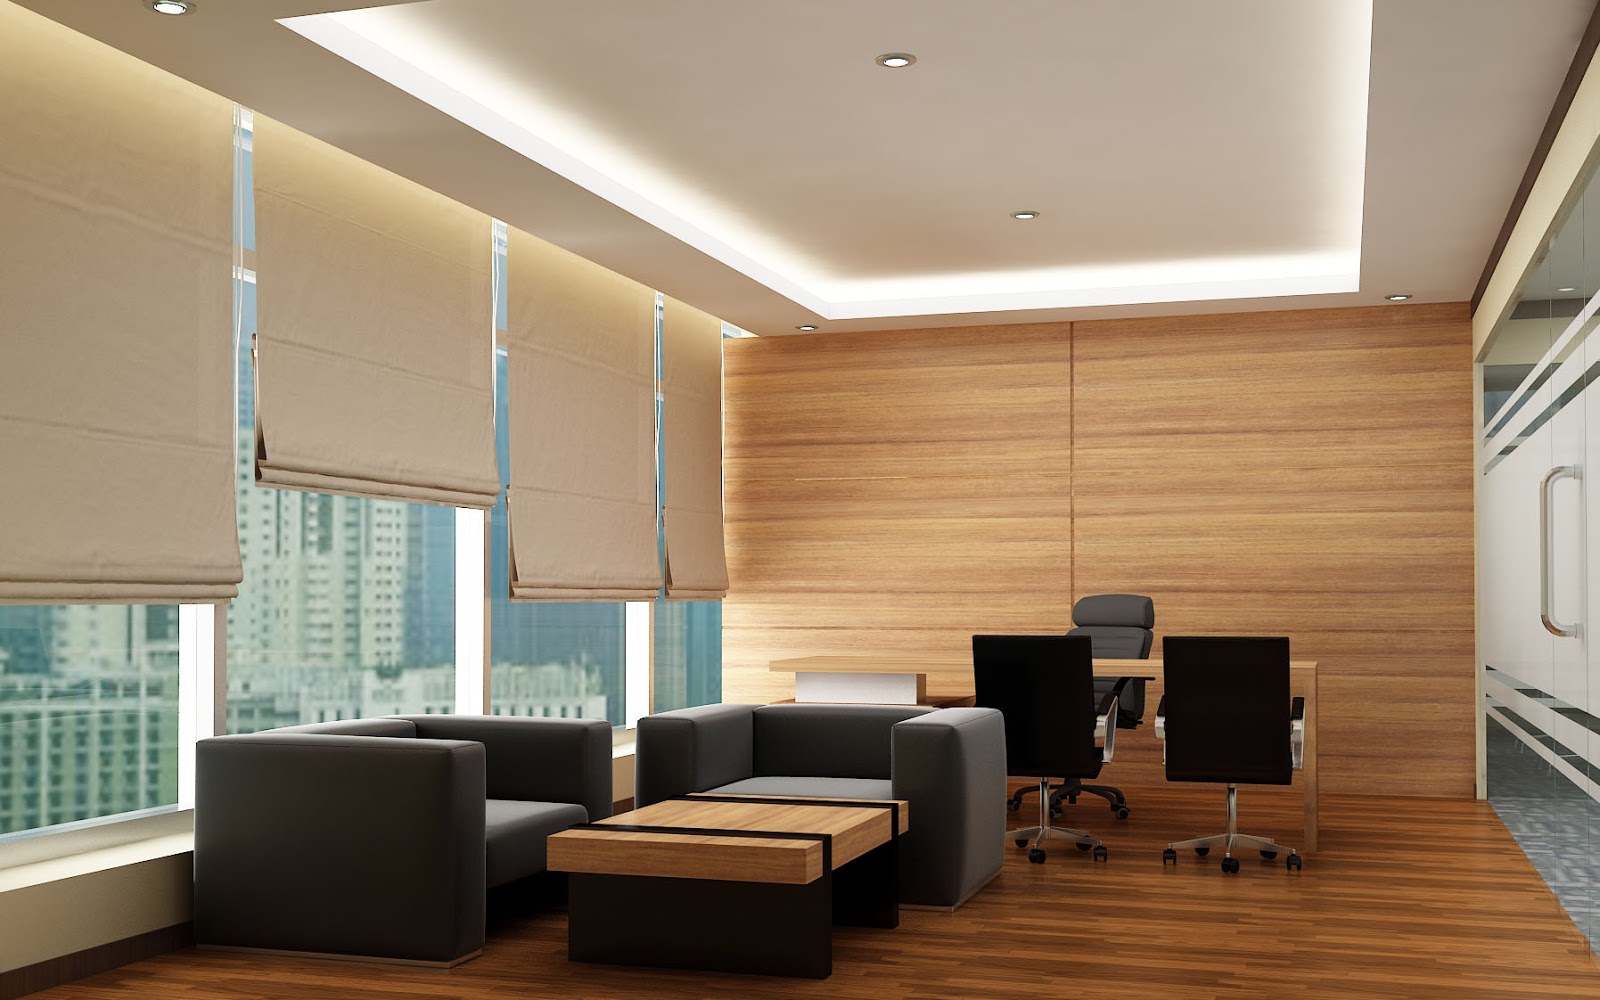 office-director-room-klang-valley-interior-designer_director-office-design_office_industrial-office-design-traditional-furniture-software-ceo-innovative-optometry-open-space.jpg